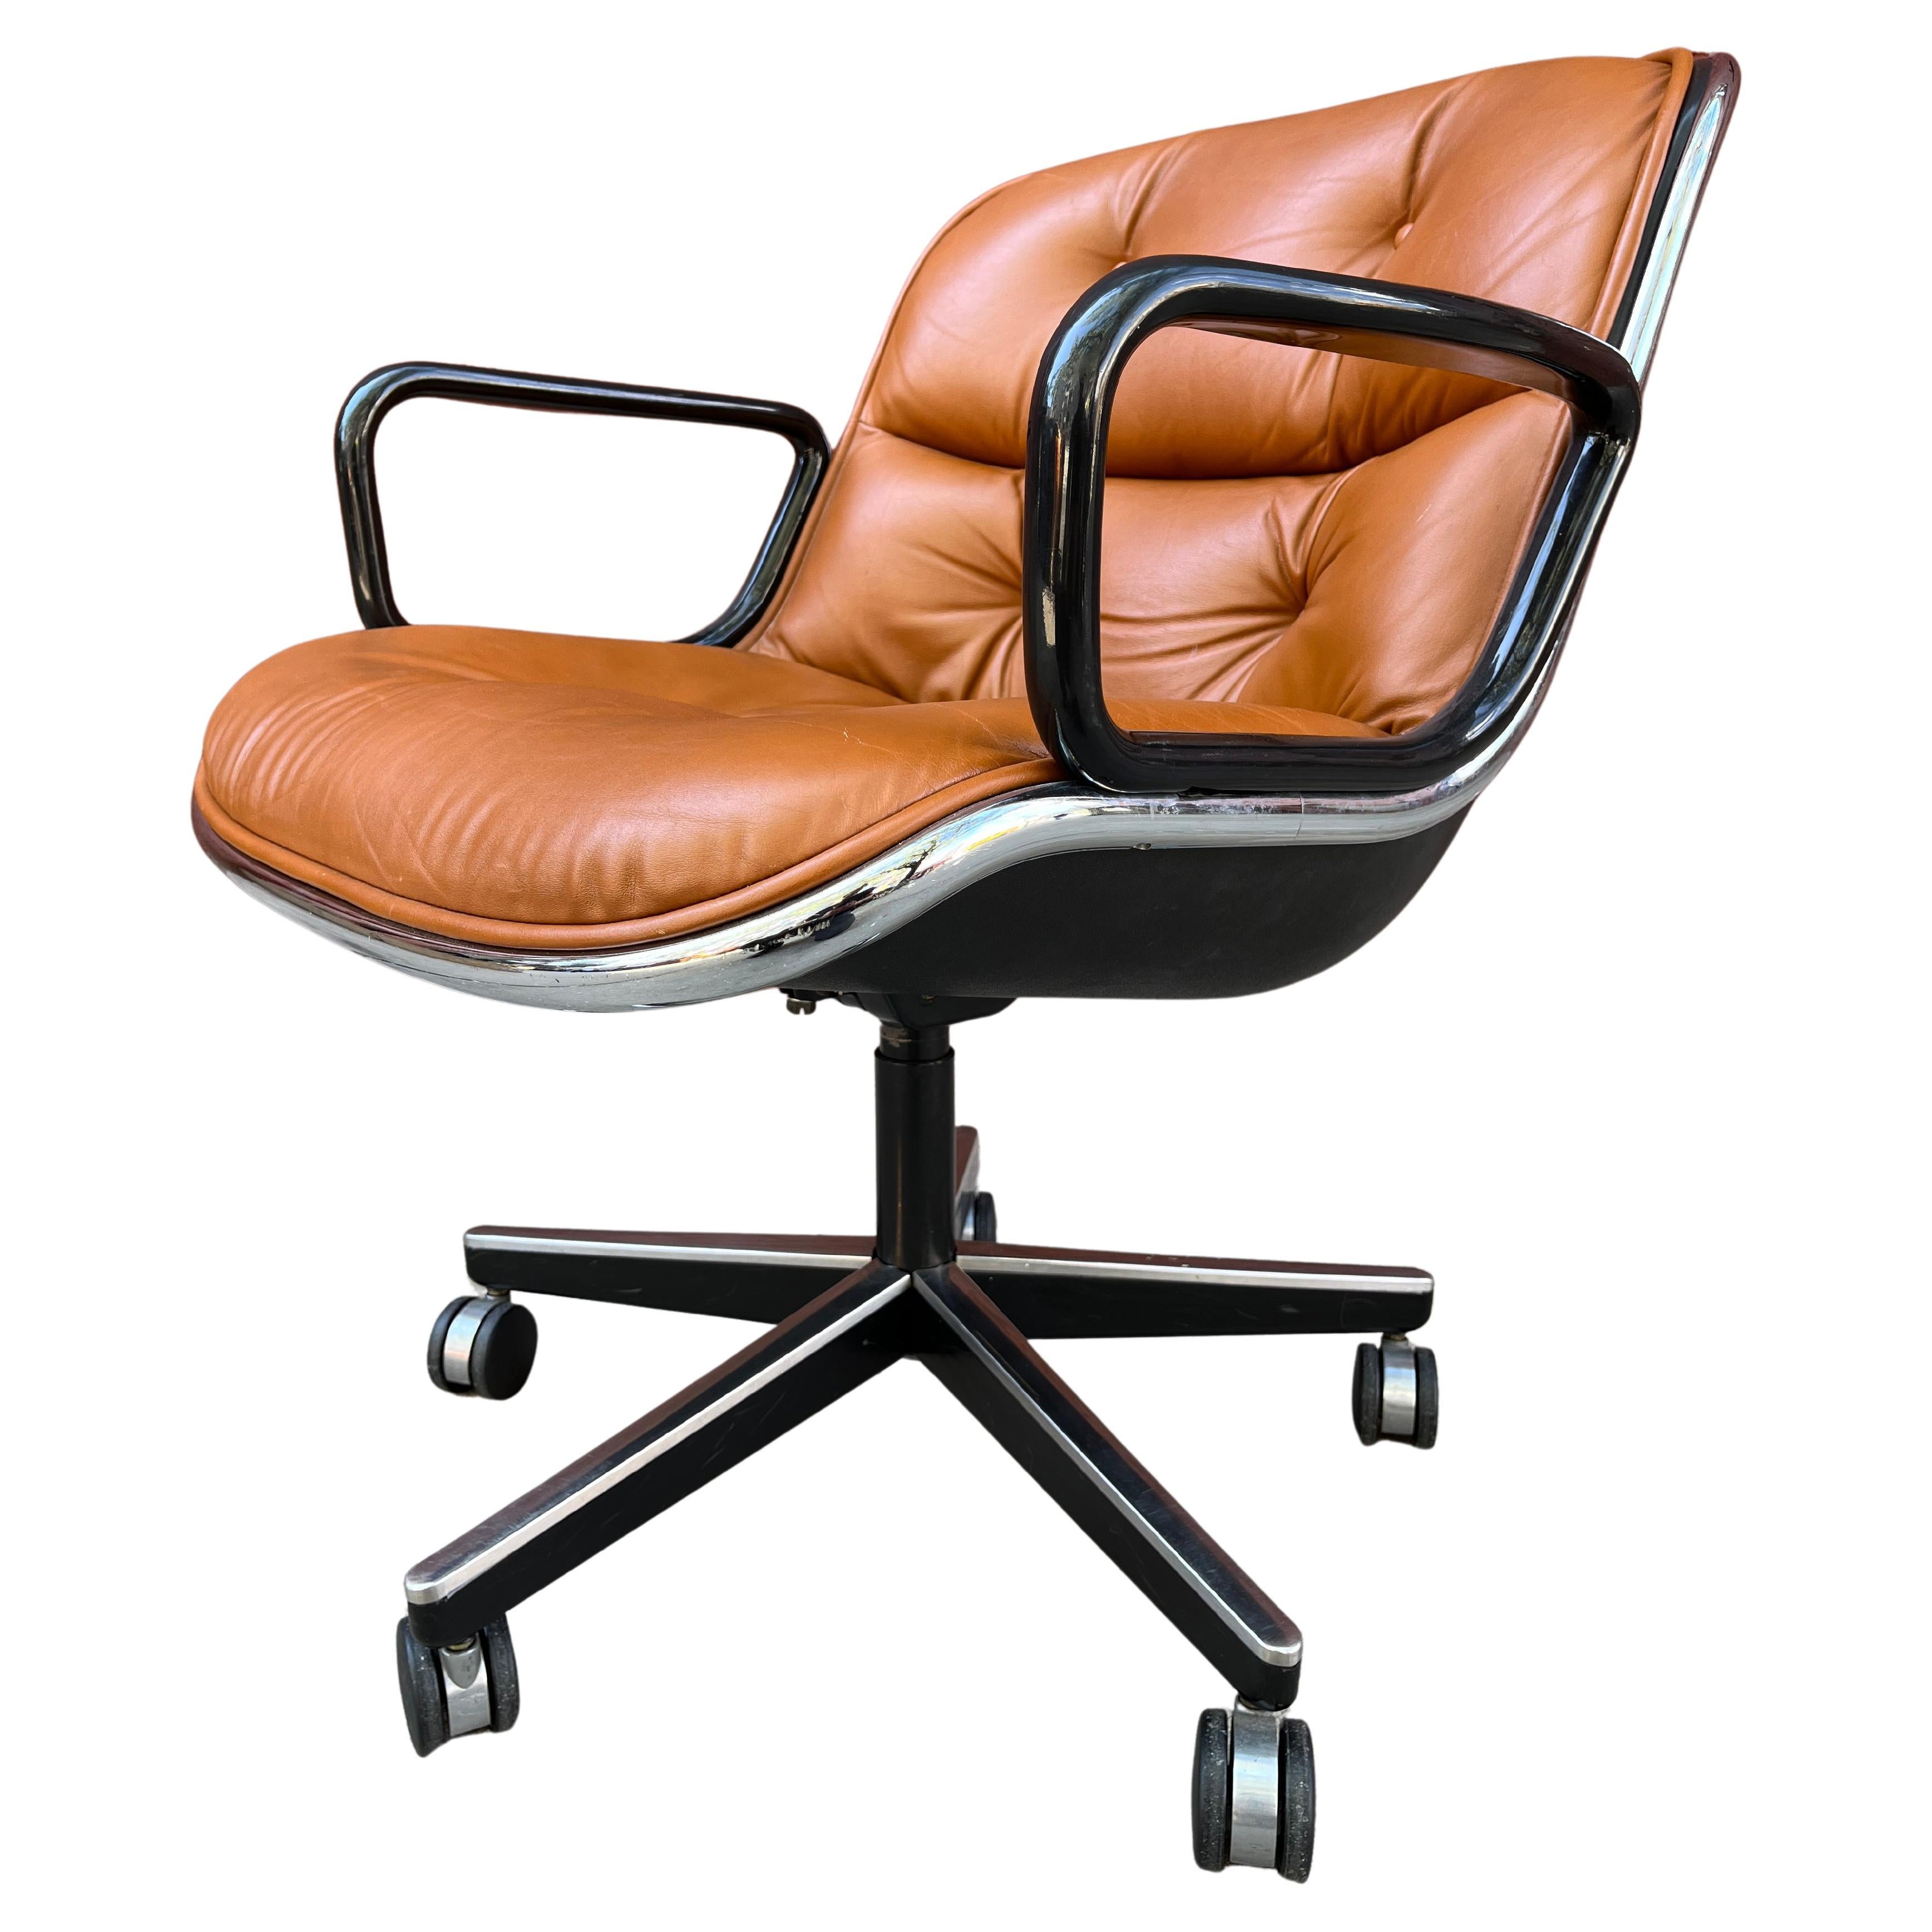 Charles Pollock for Knoll office desk chair featuring brown leather upholstery. When you think of the perfect Pollock chair this one probably comes to mind. This executive office chair is an icon of Mid-Century Modern design and has been in